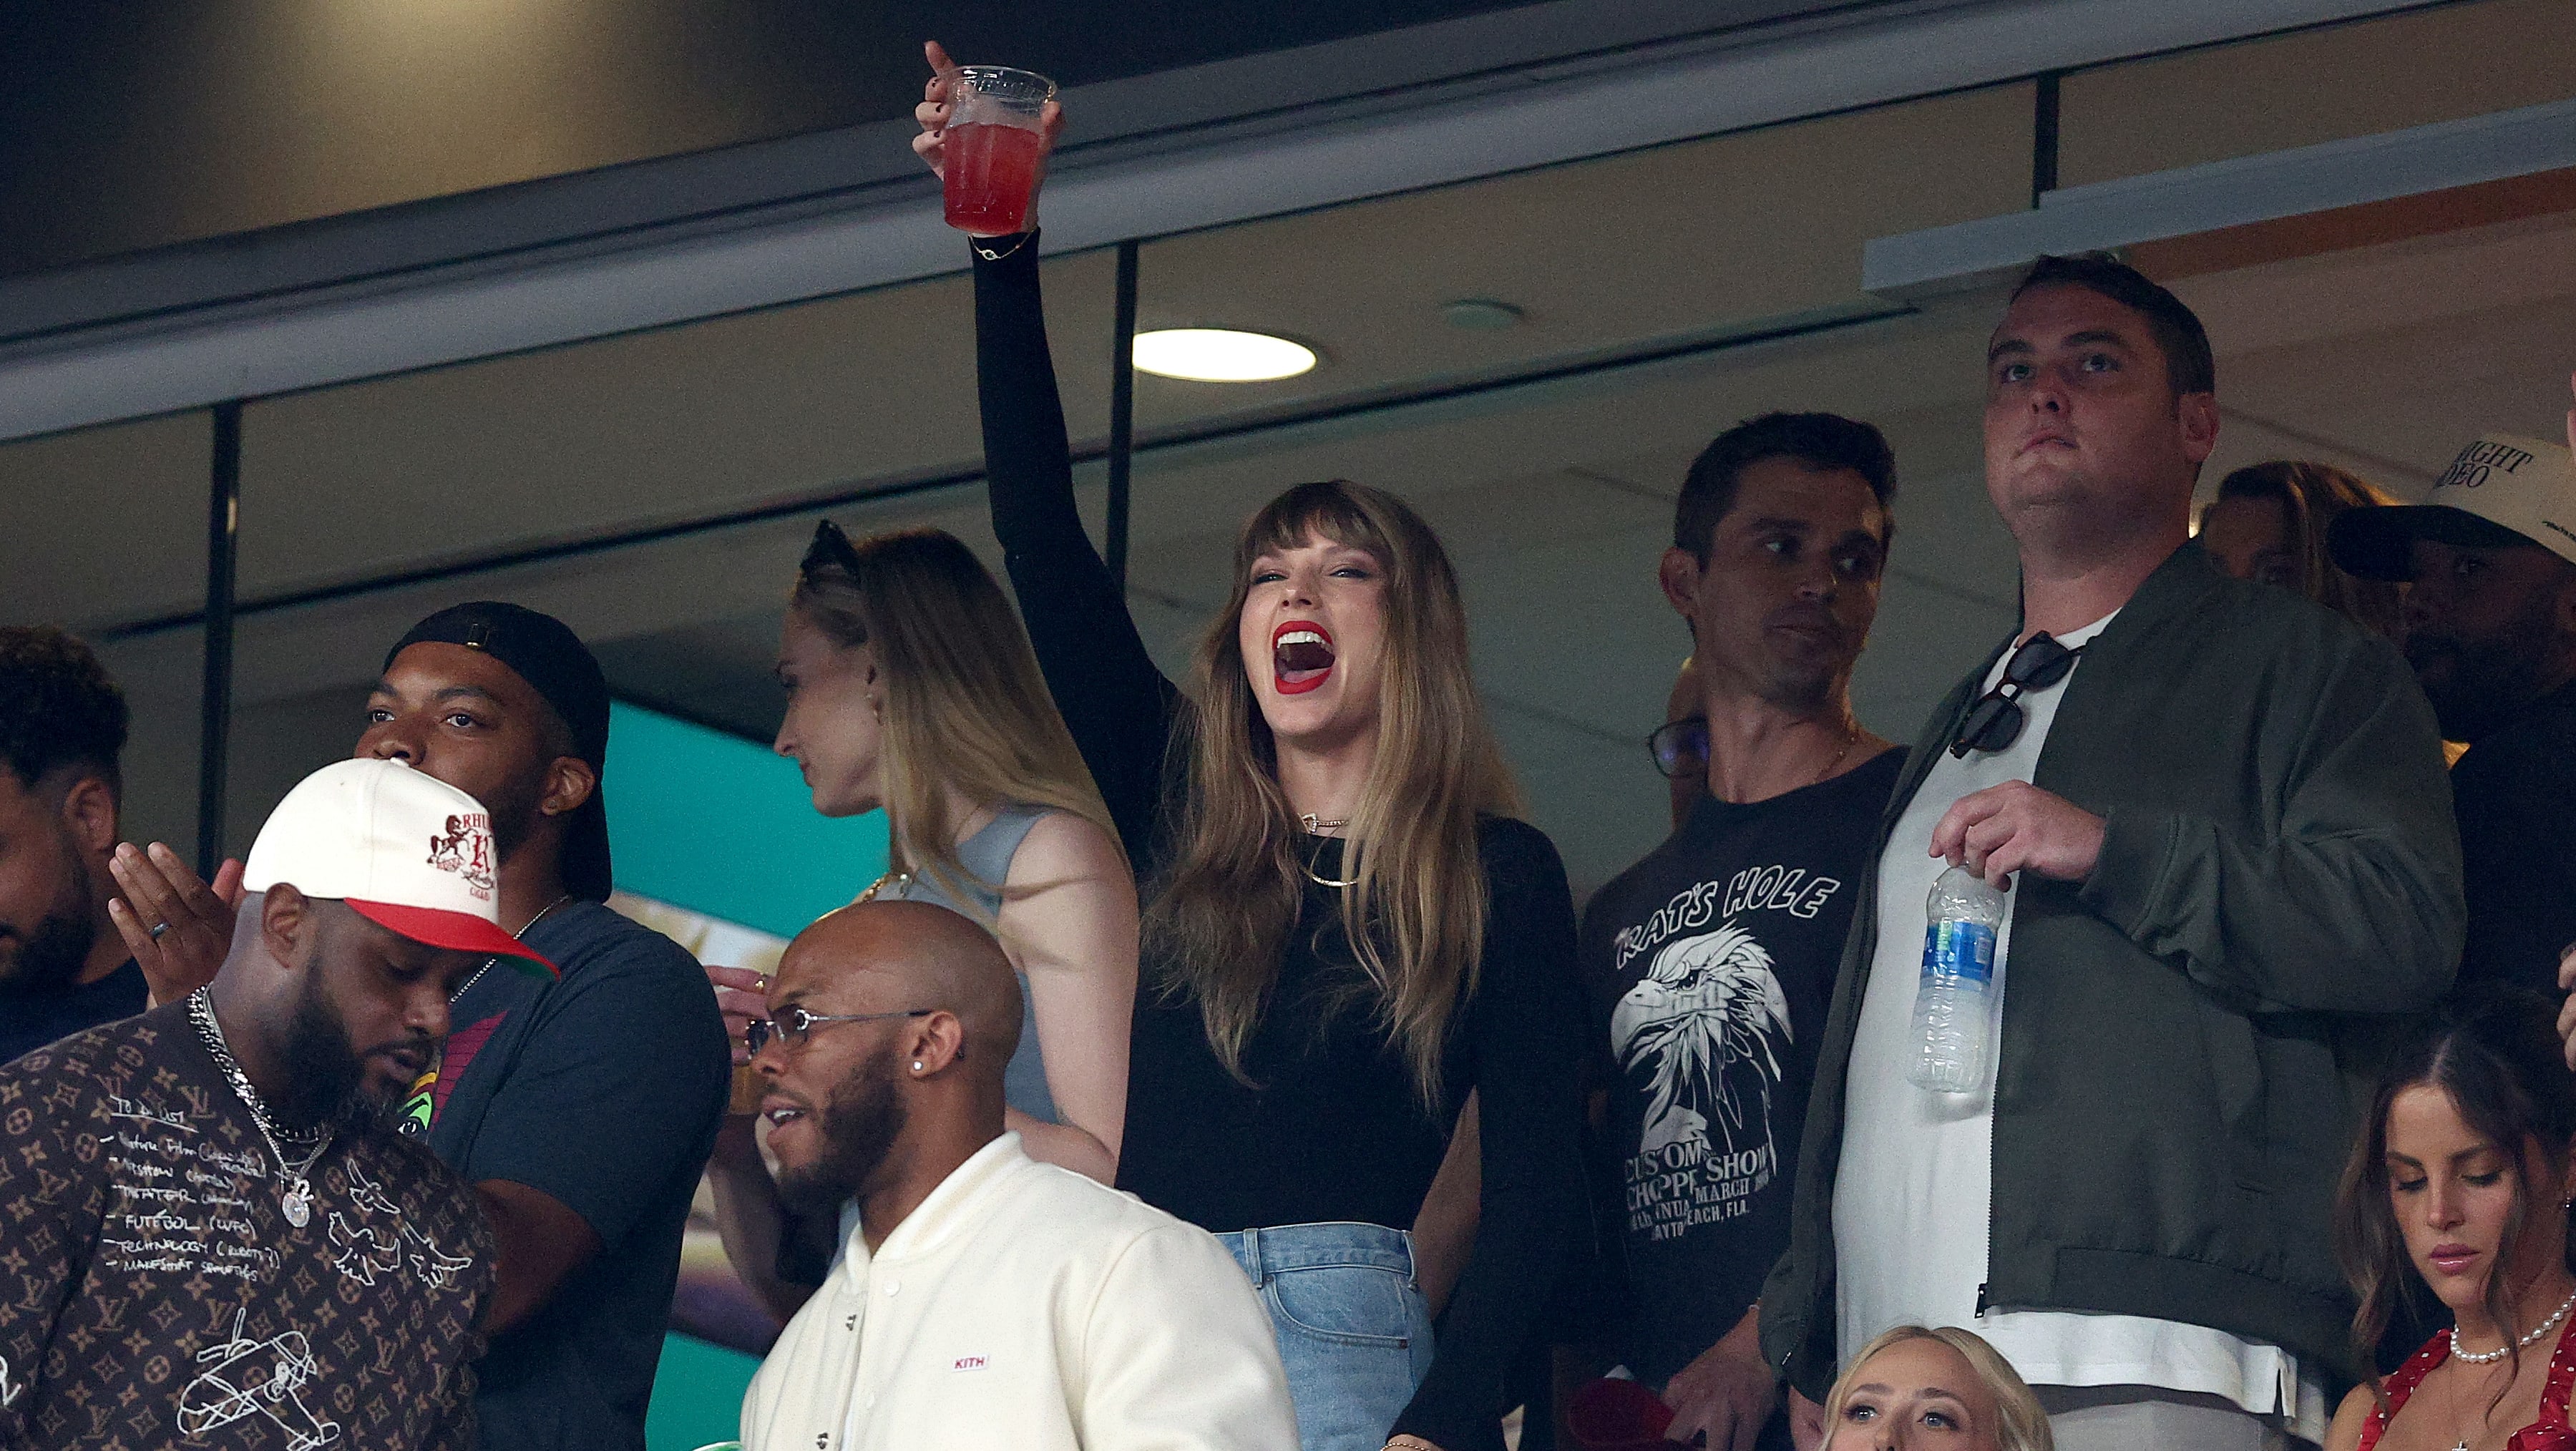 Sunday Night Football' scores ratings TD as Swifties tune in with